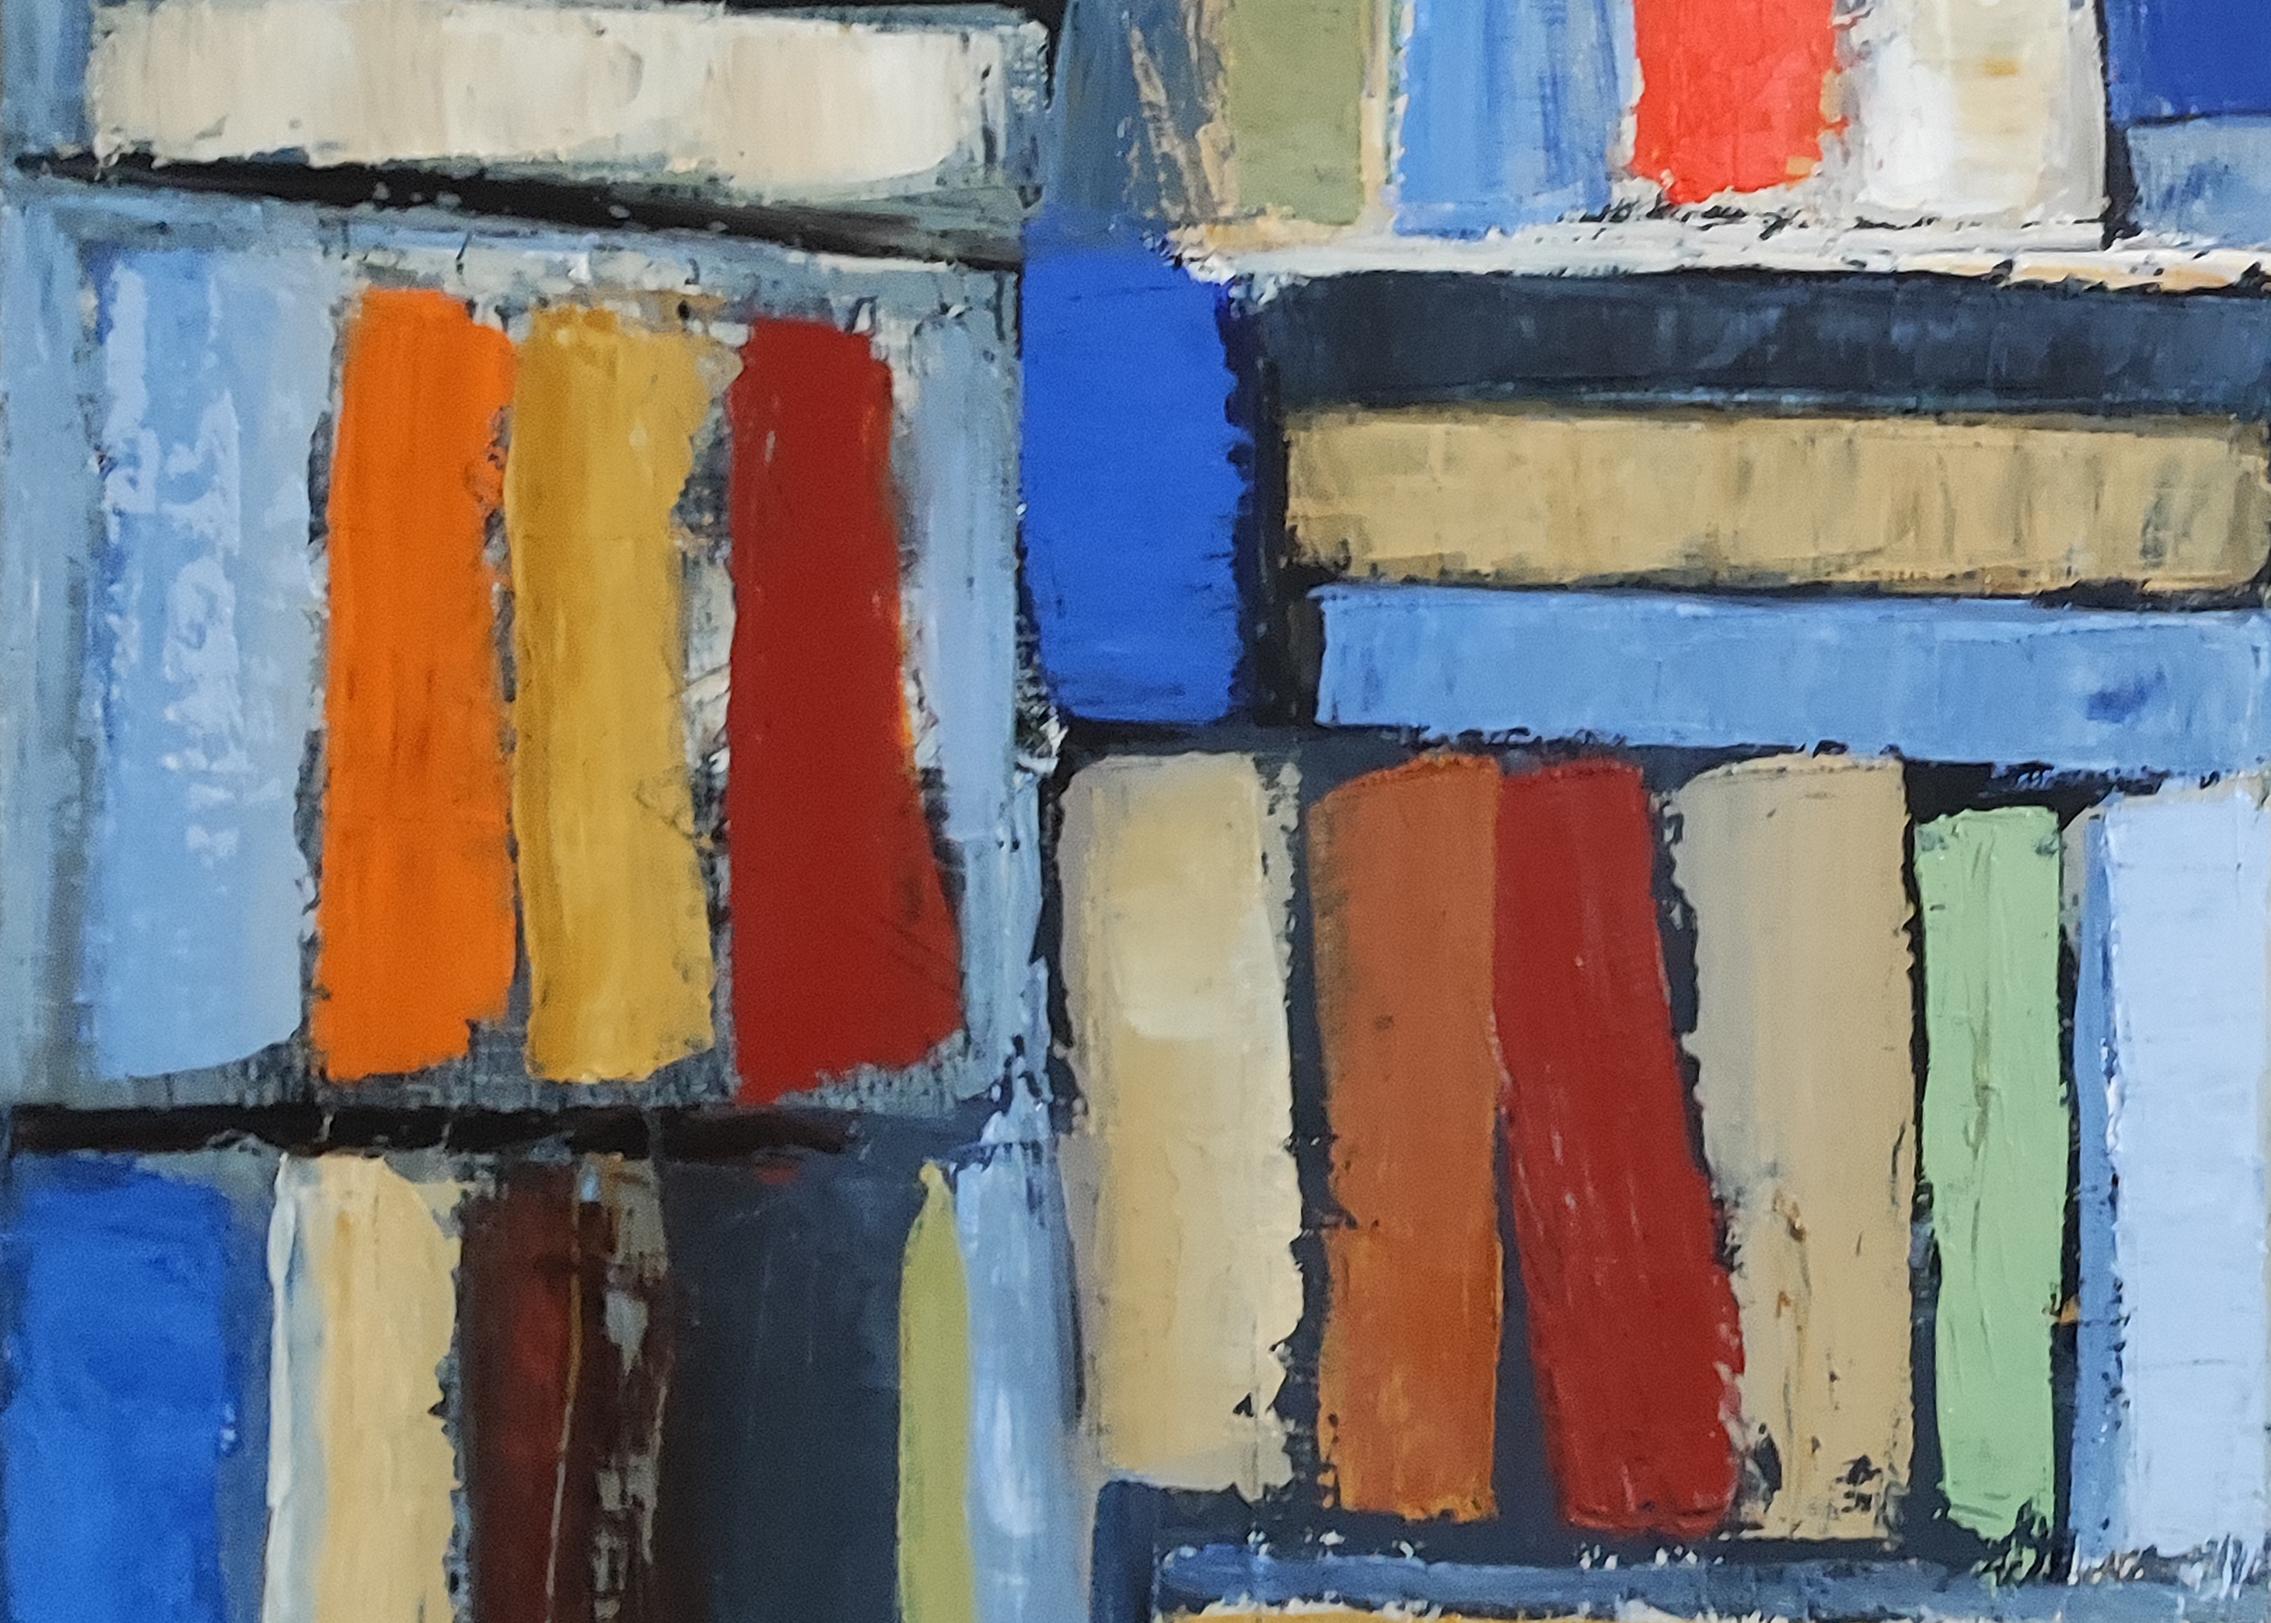 library 2, colors books in library, abstract, expressionism, oil on canvas 9